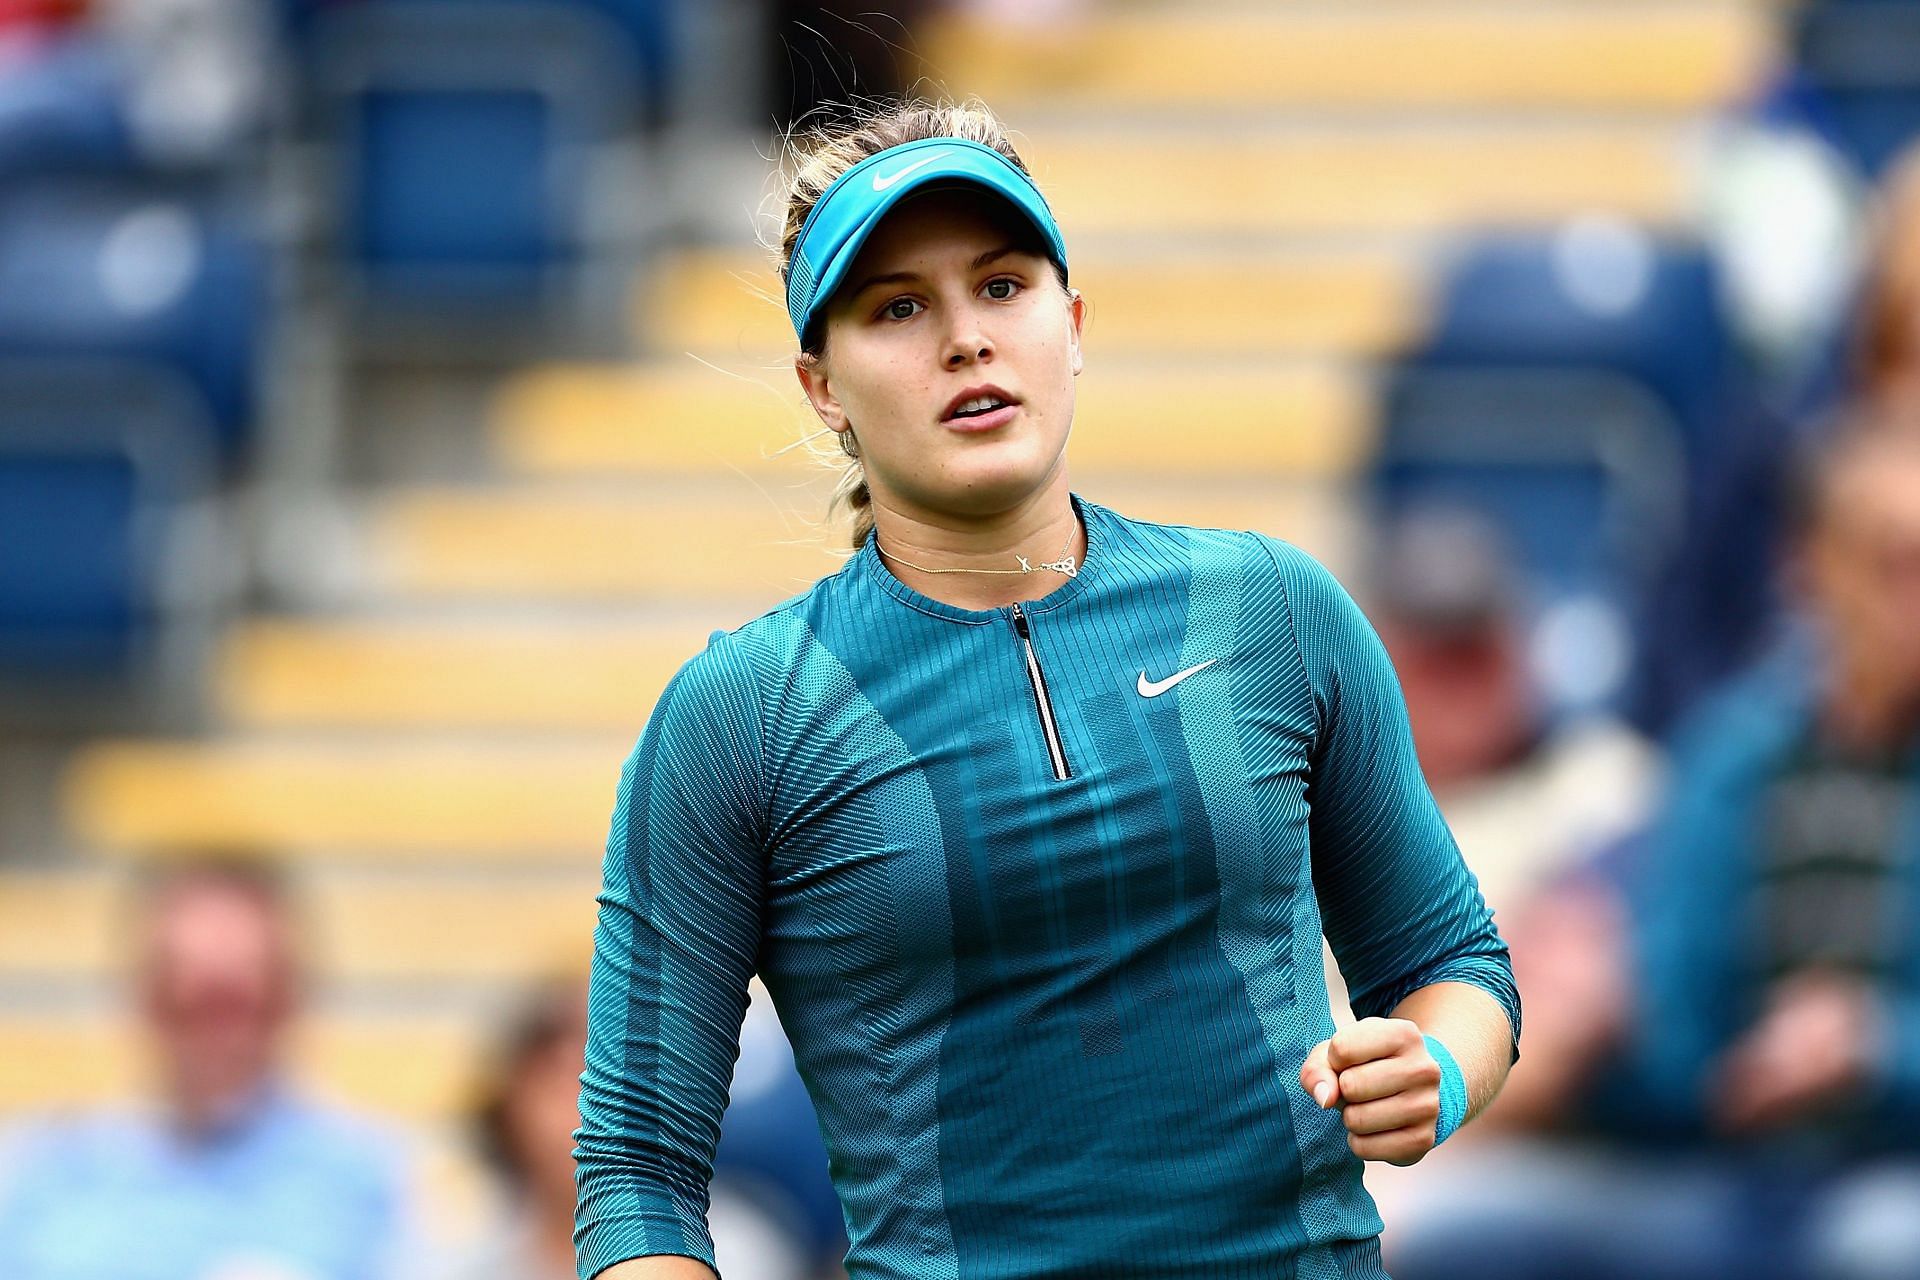 Eugenie Bouchard is on the comeback trail after a shoulder injury